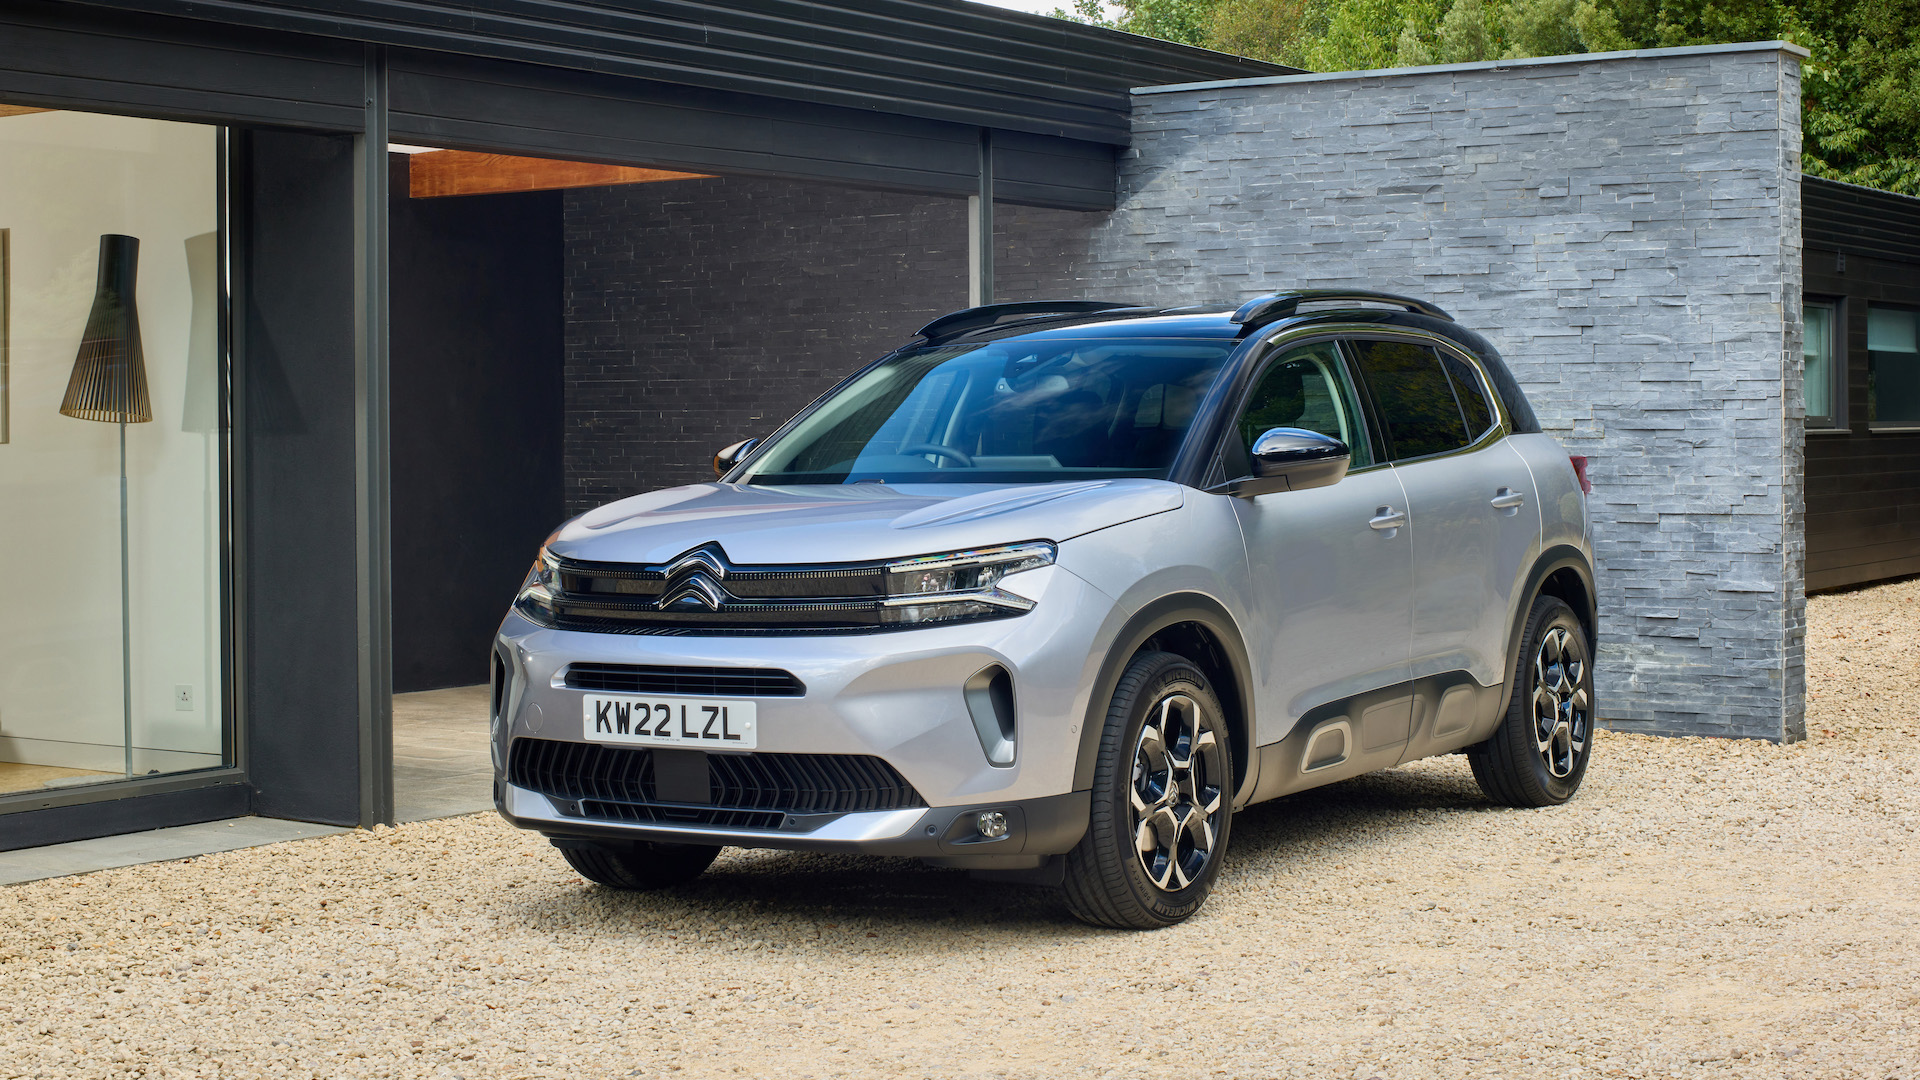 Citroen C5 Aircross Plug-In Hybrid review - EVs Unplugged